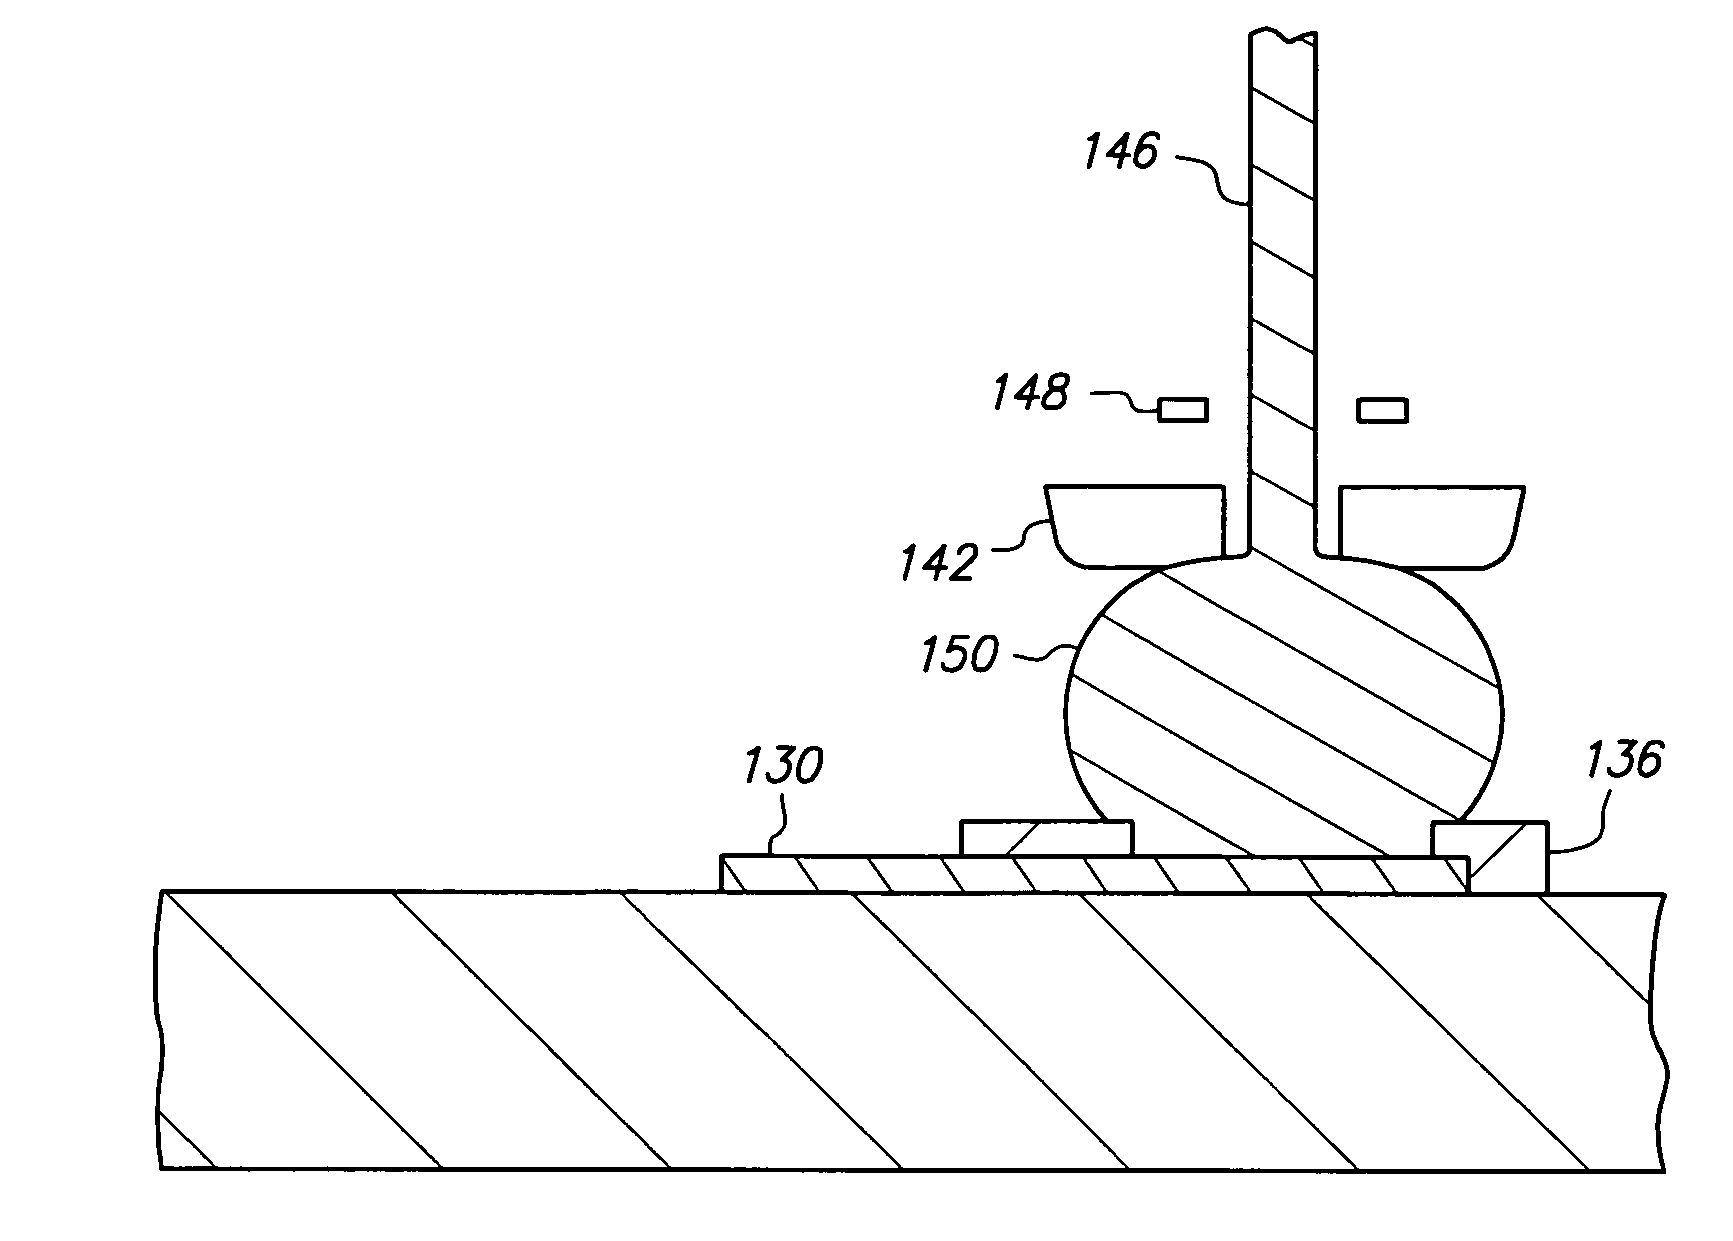 Semiconductor chip assembly with welded metal pillar that includes enlarged ball bond